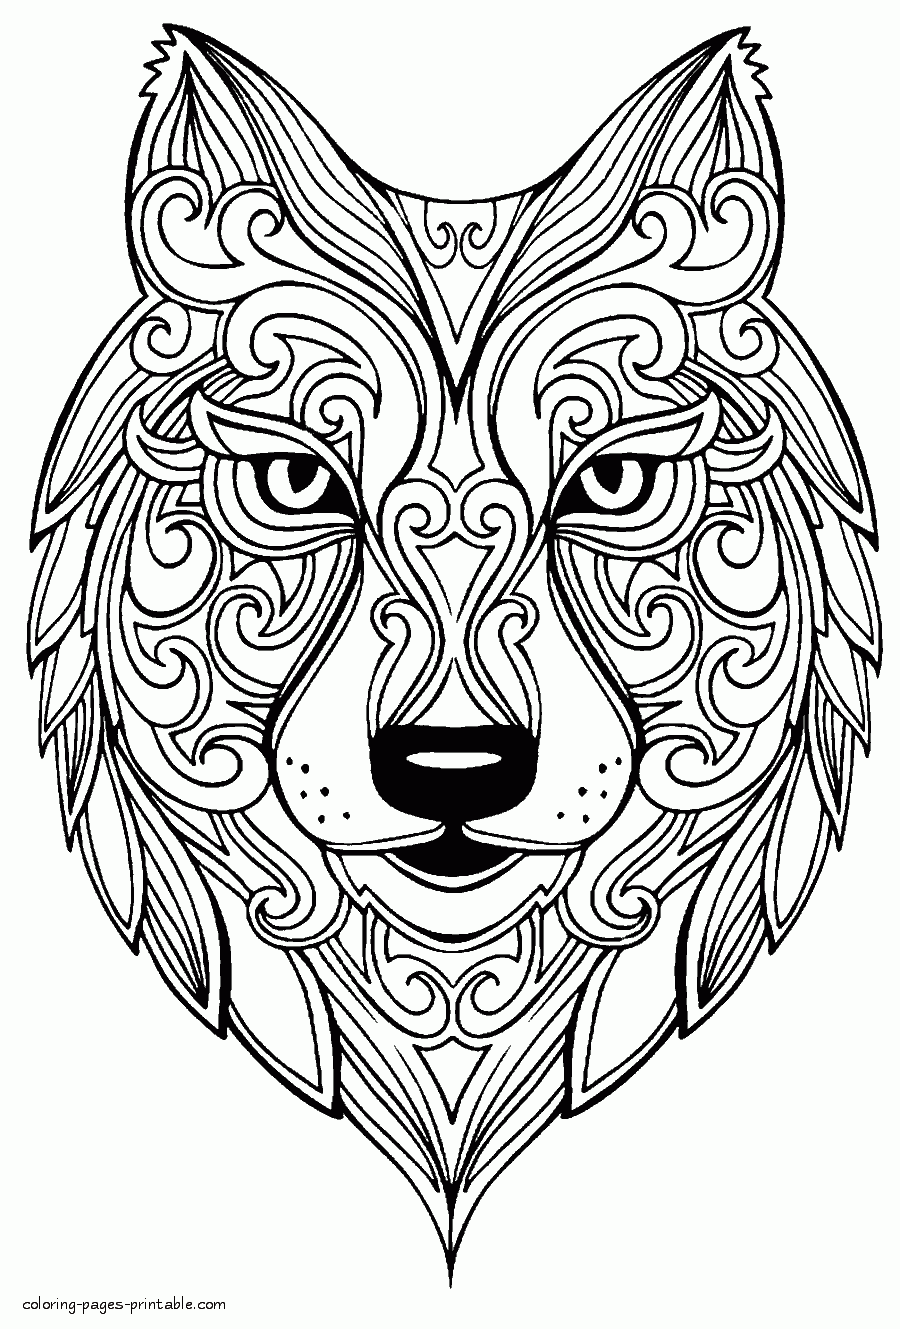 Animal Printable Coloring Pictures For Adults || COLORING-PAGES 